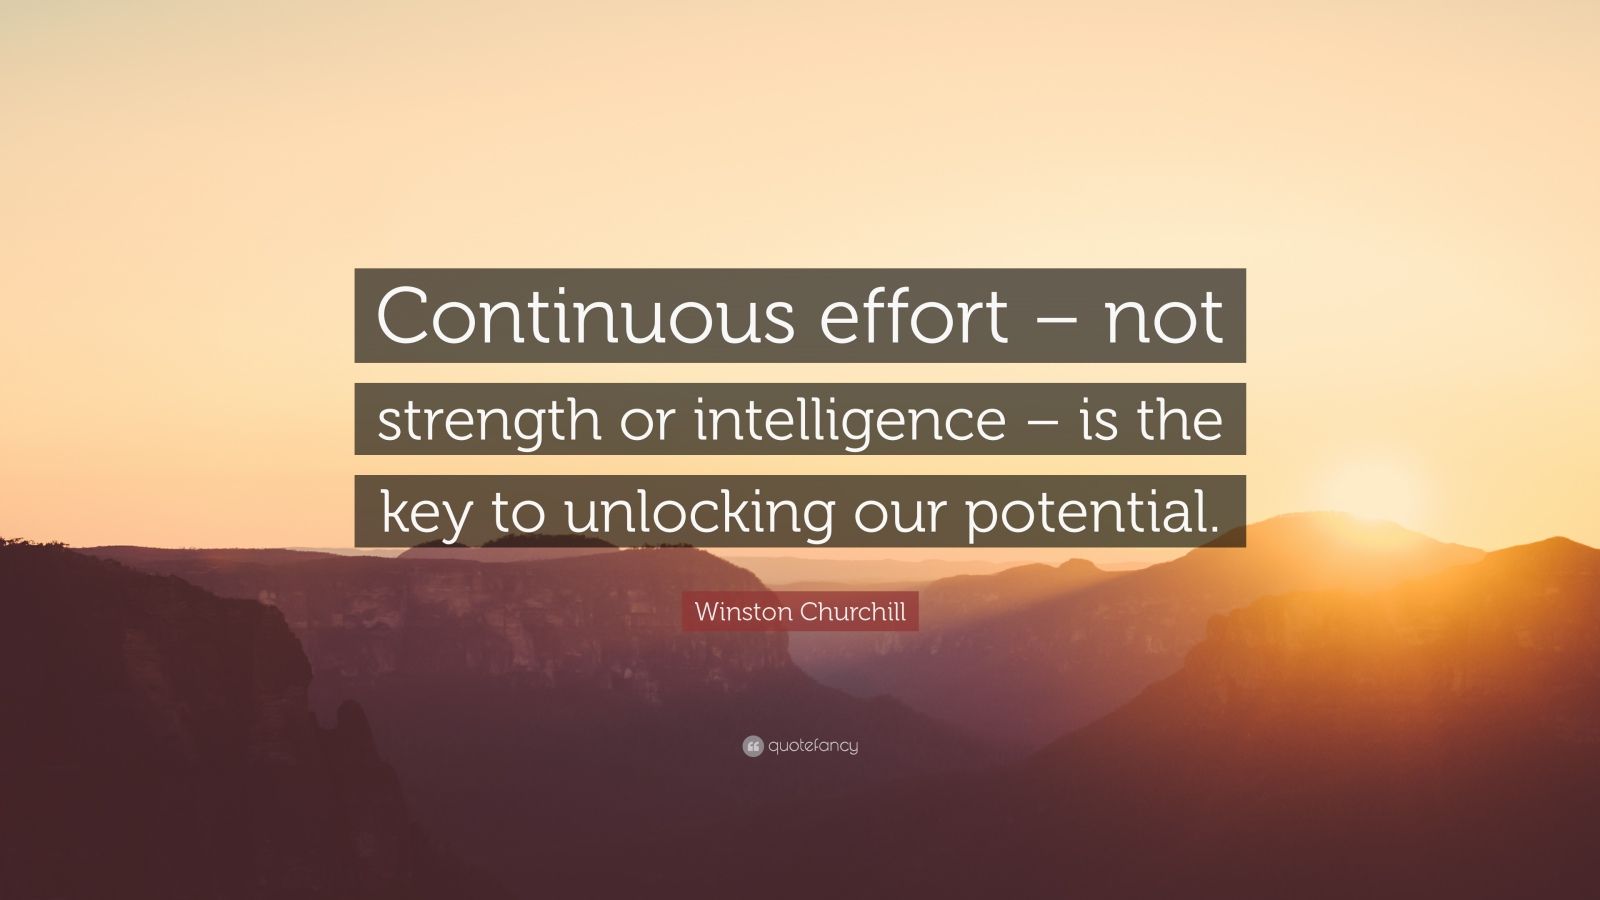 Winston Churchill Quote: “Continuous effort – not strength or